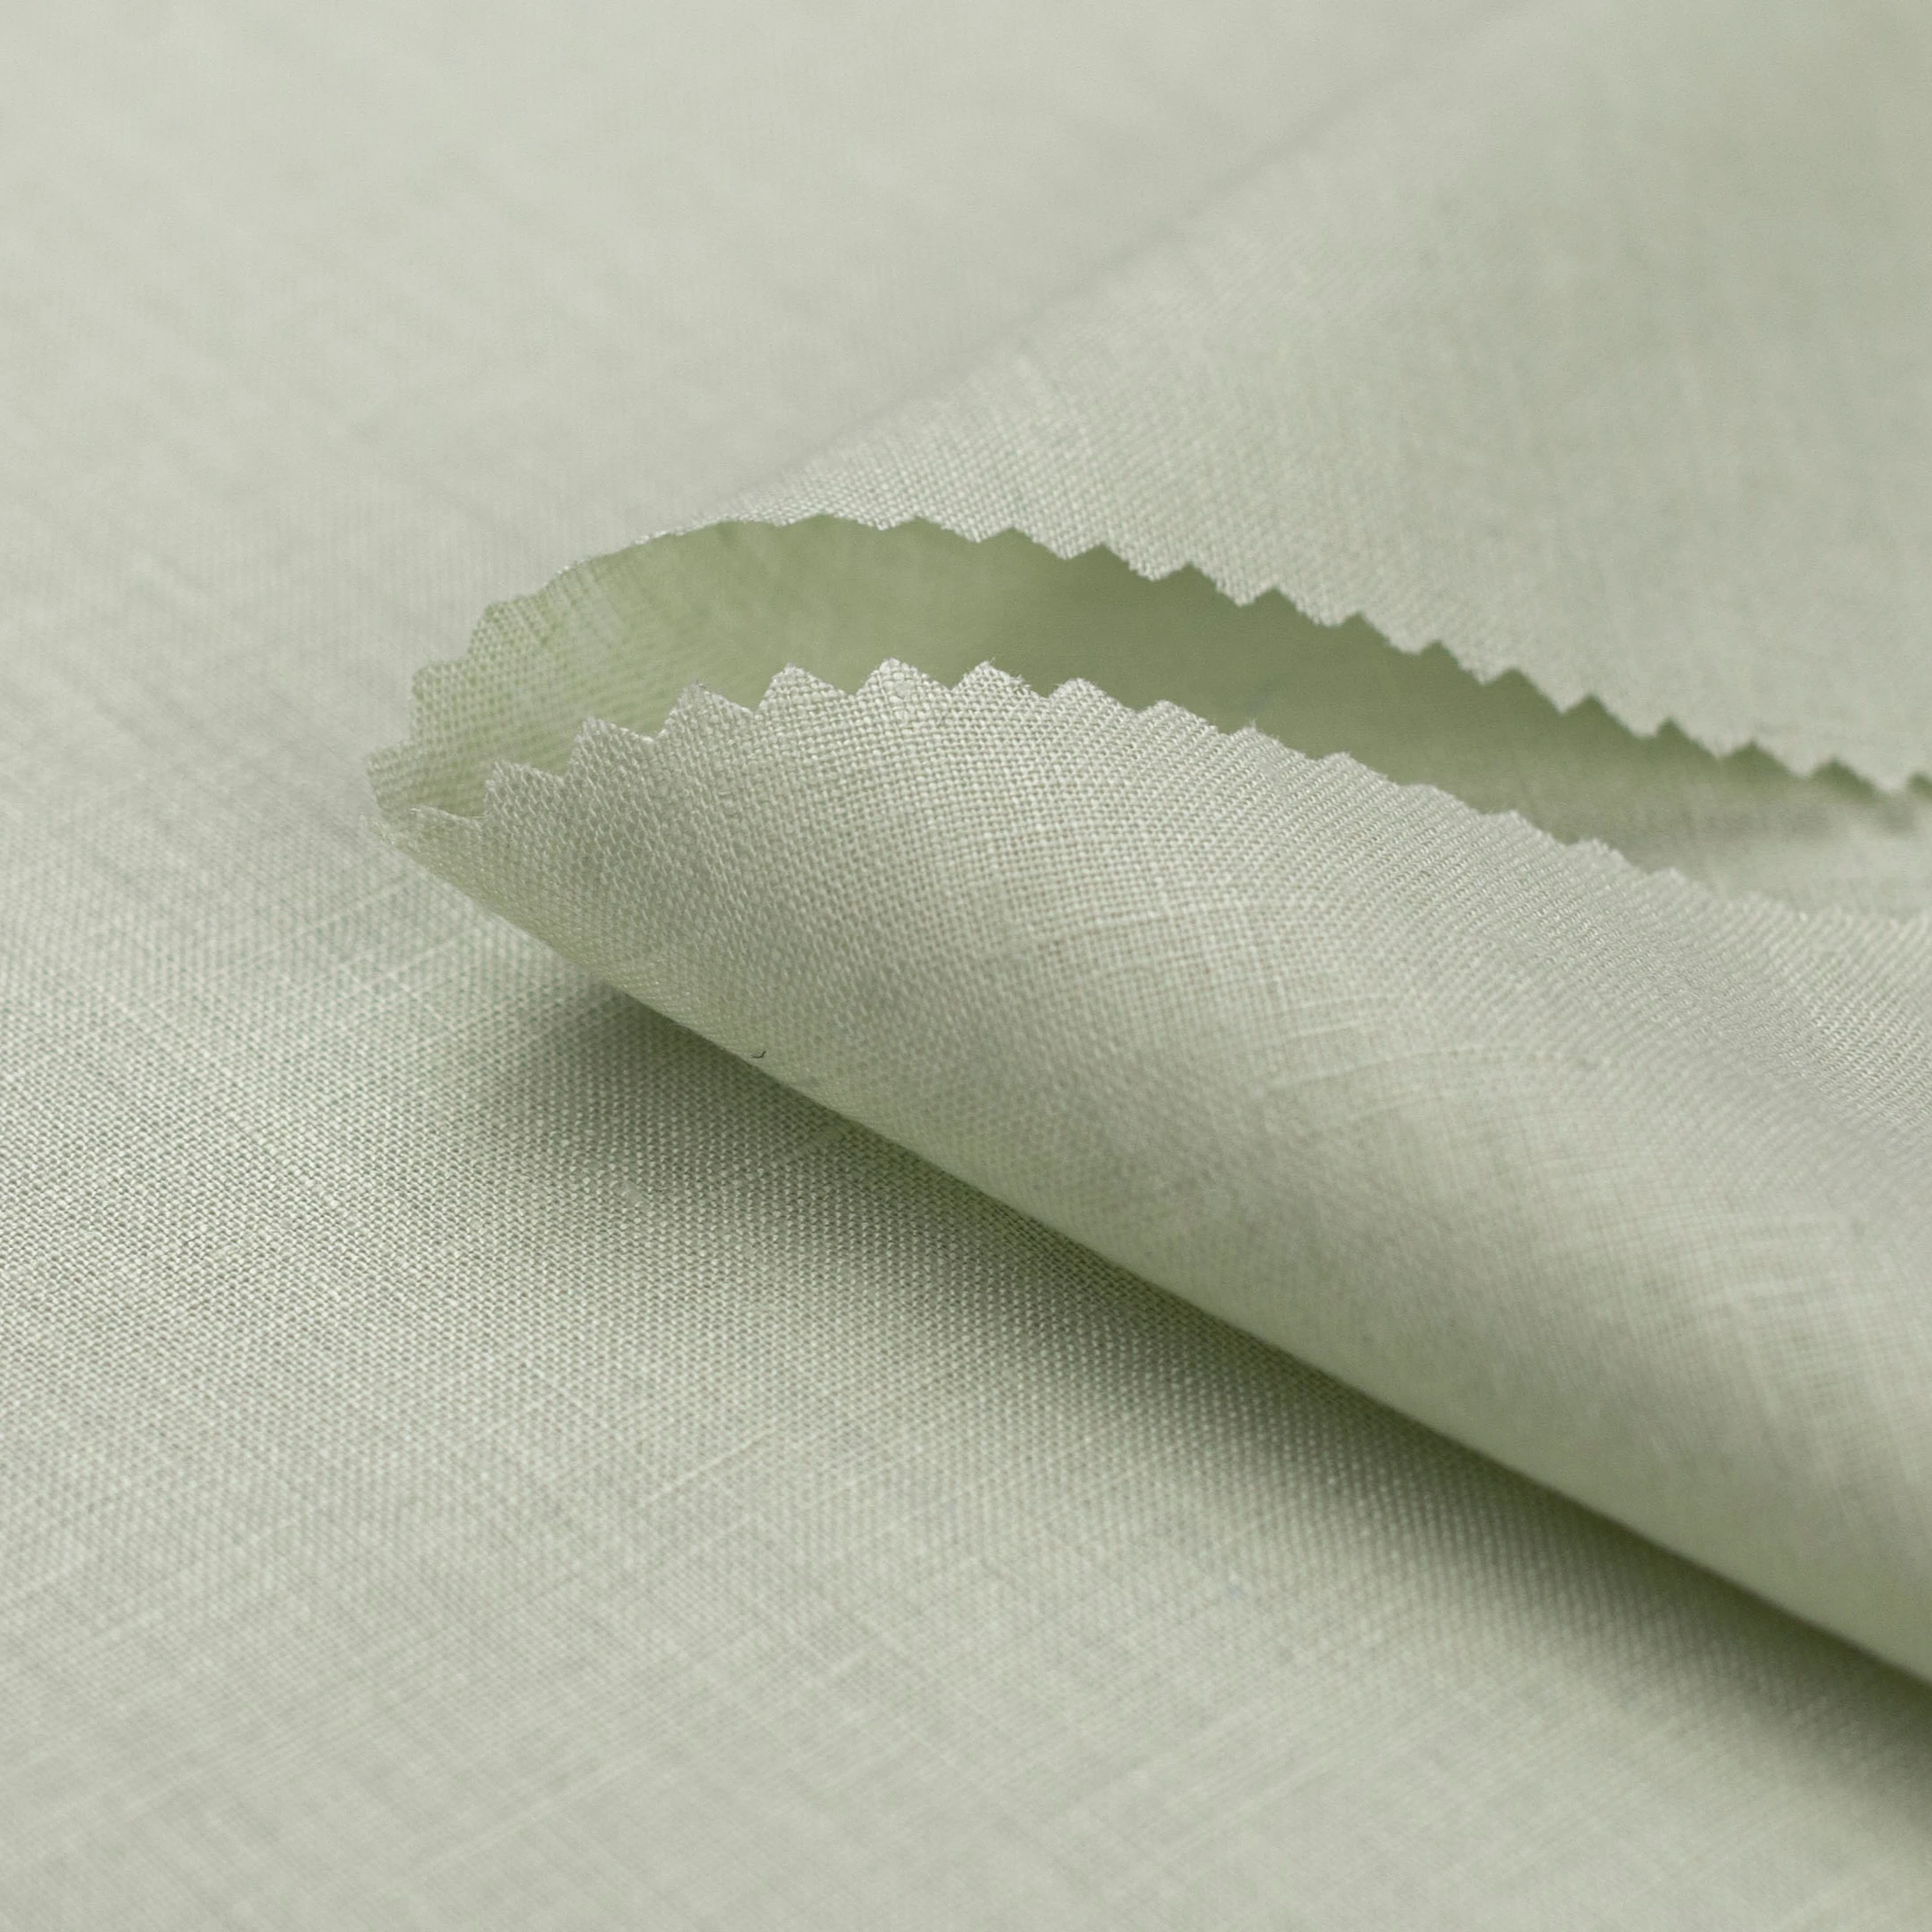 High quality 100% pure linen fabric with European Flax OEKO certification for clothing or home textile (1600545808775)